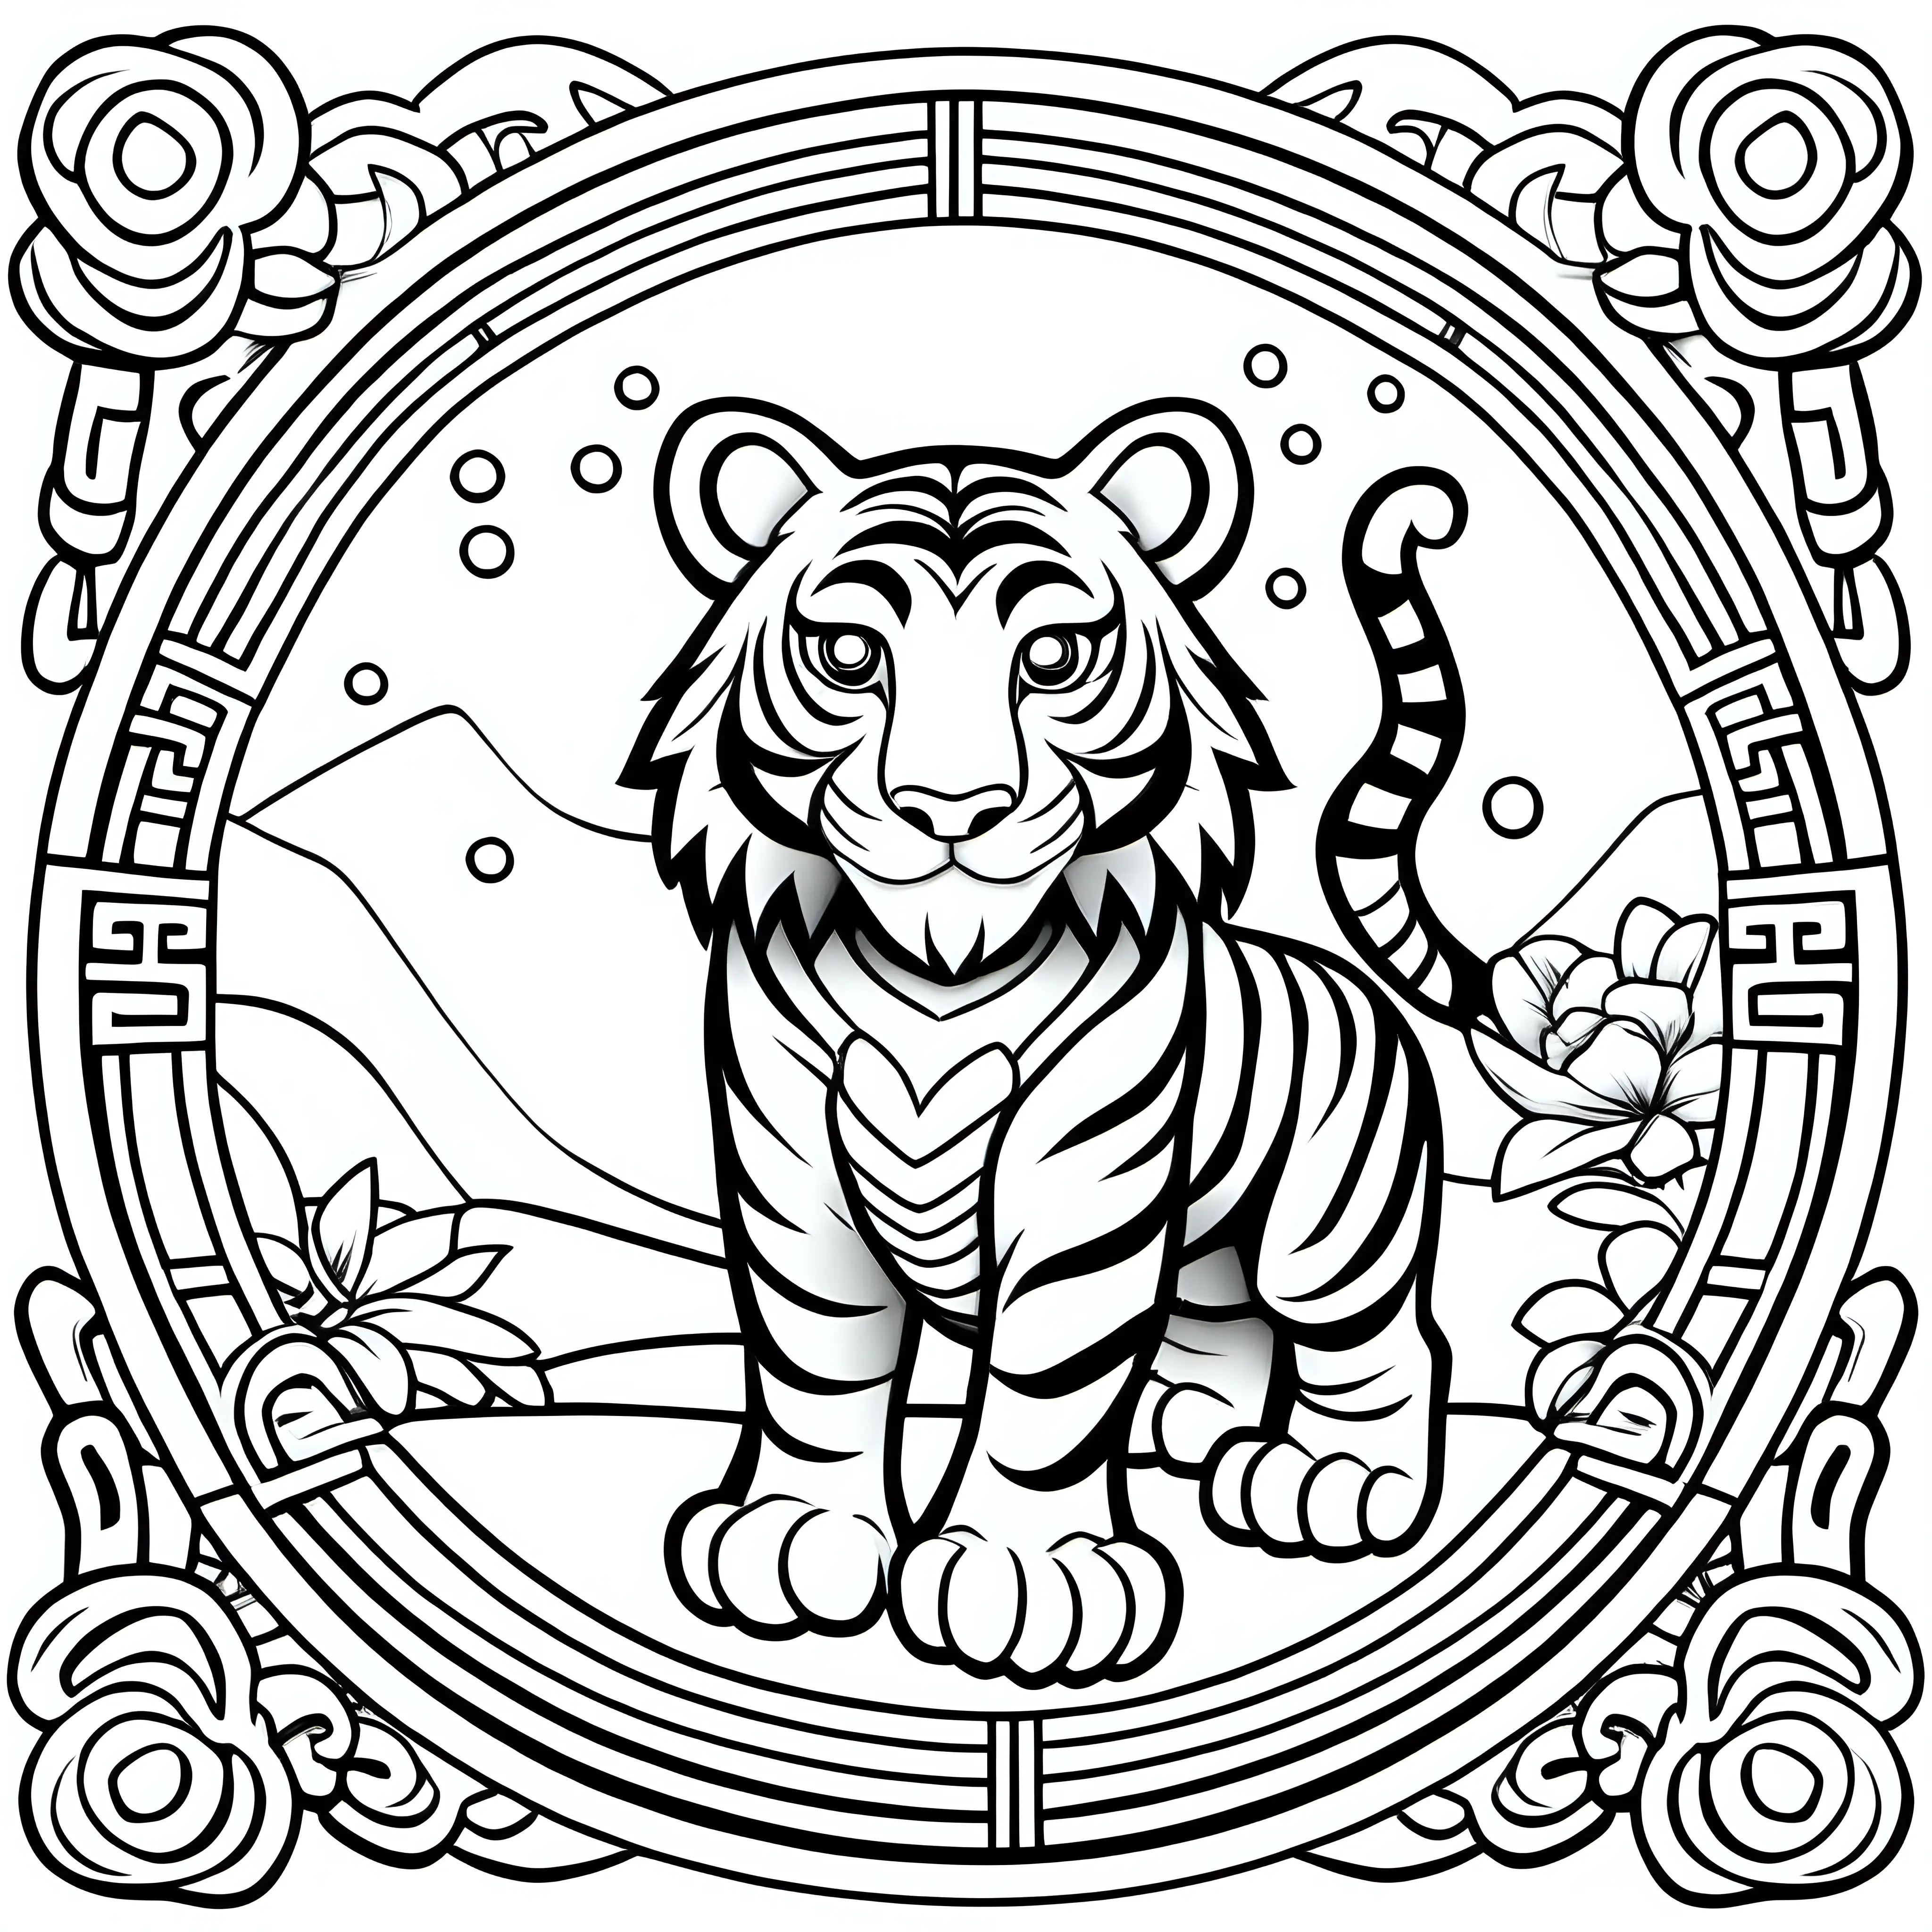 Chinese Zodiac Tiger Coloring Page for Lunar New Year